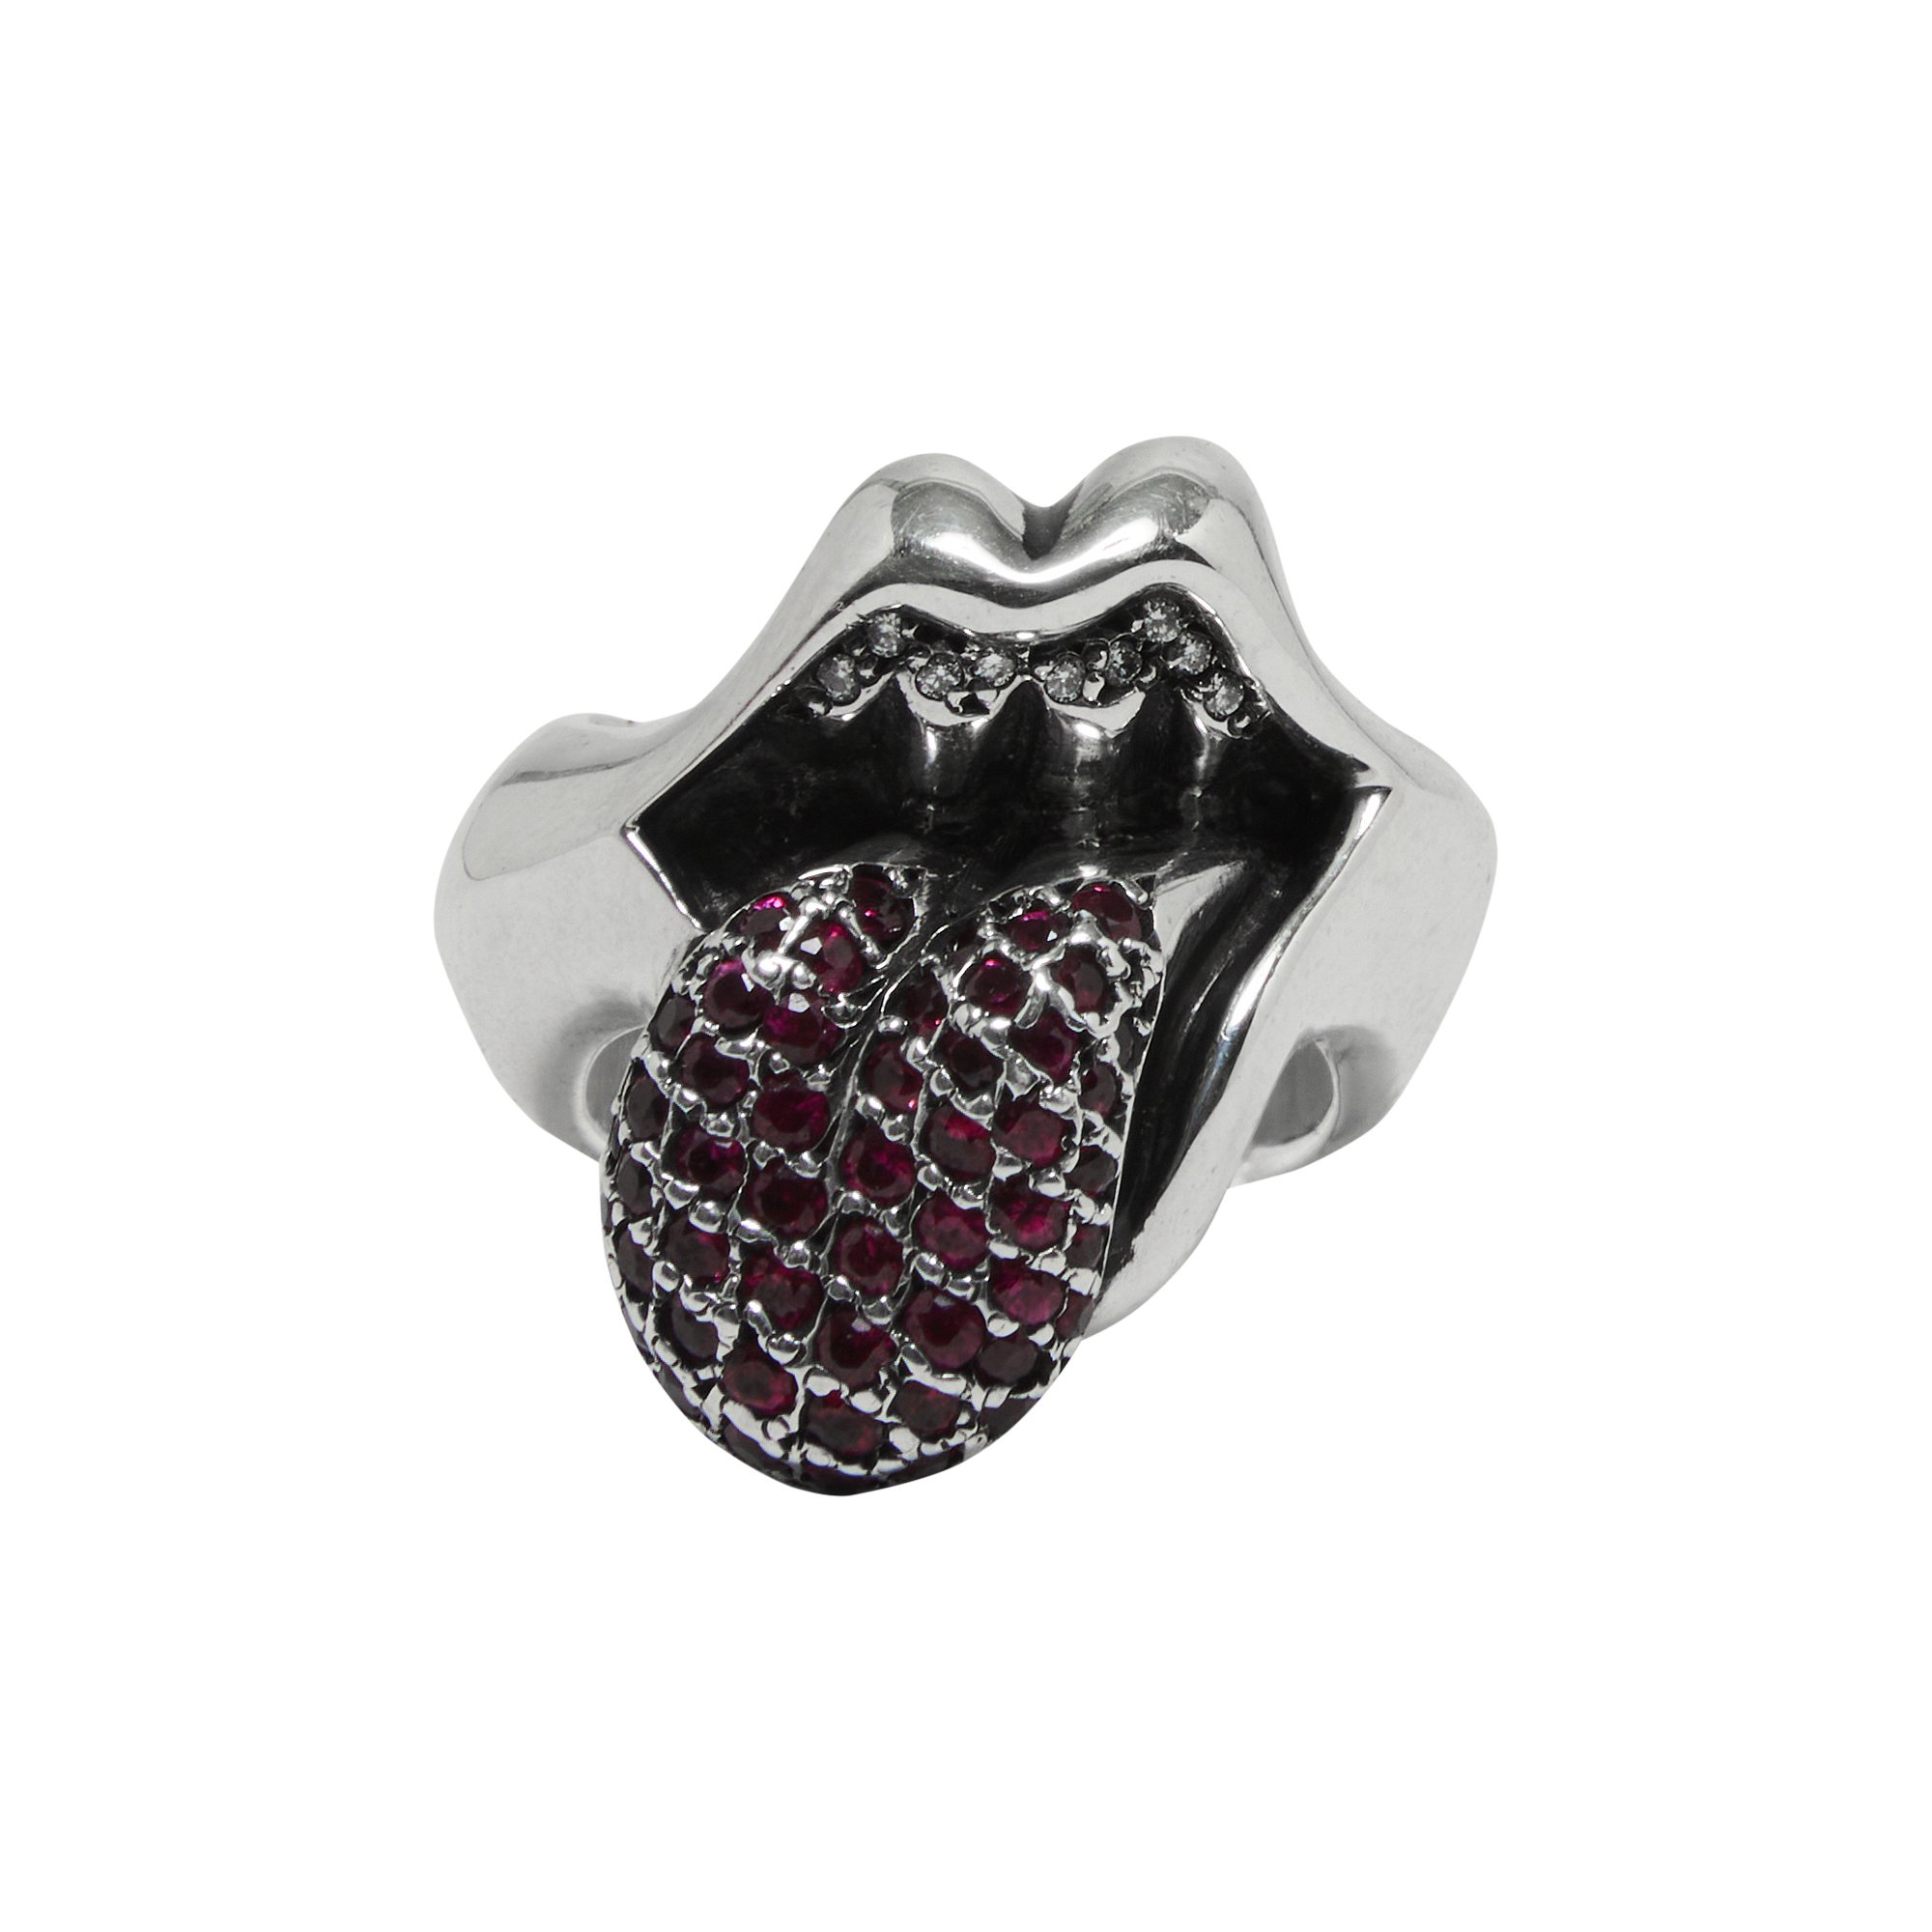 Buy Chrome Hearts Diamond Studded Rolling Stones Ring 'Silver 